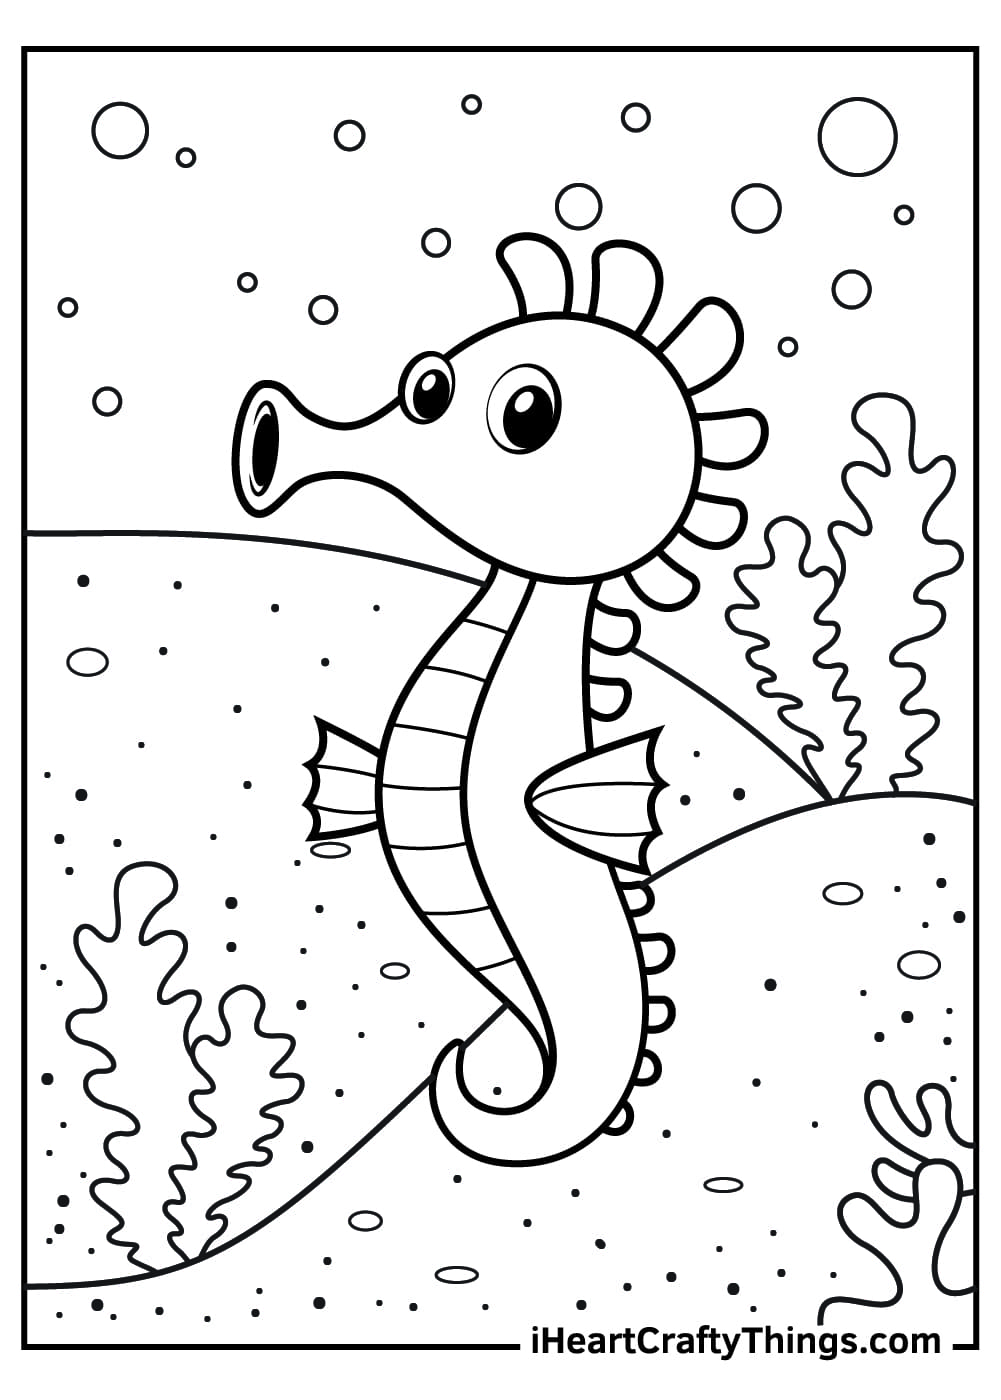 Ball Icon Black Logo Image For Kids Coloring Pages - Coloring Cool